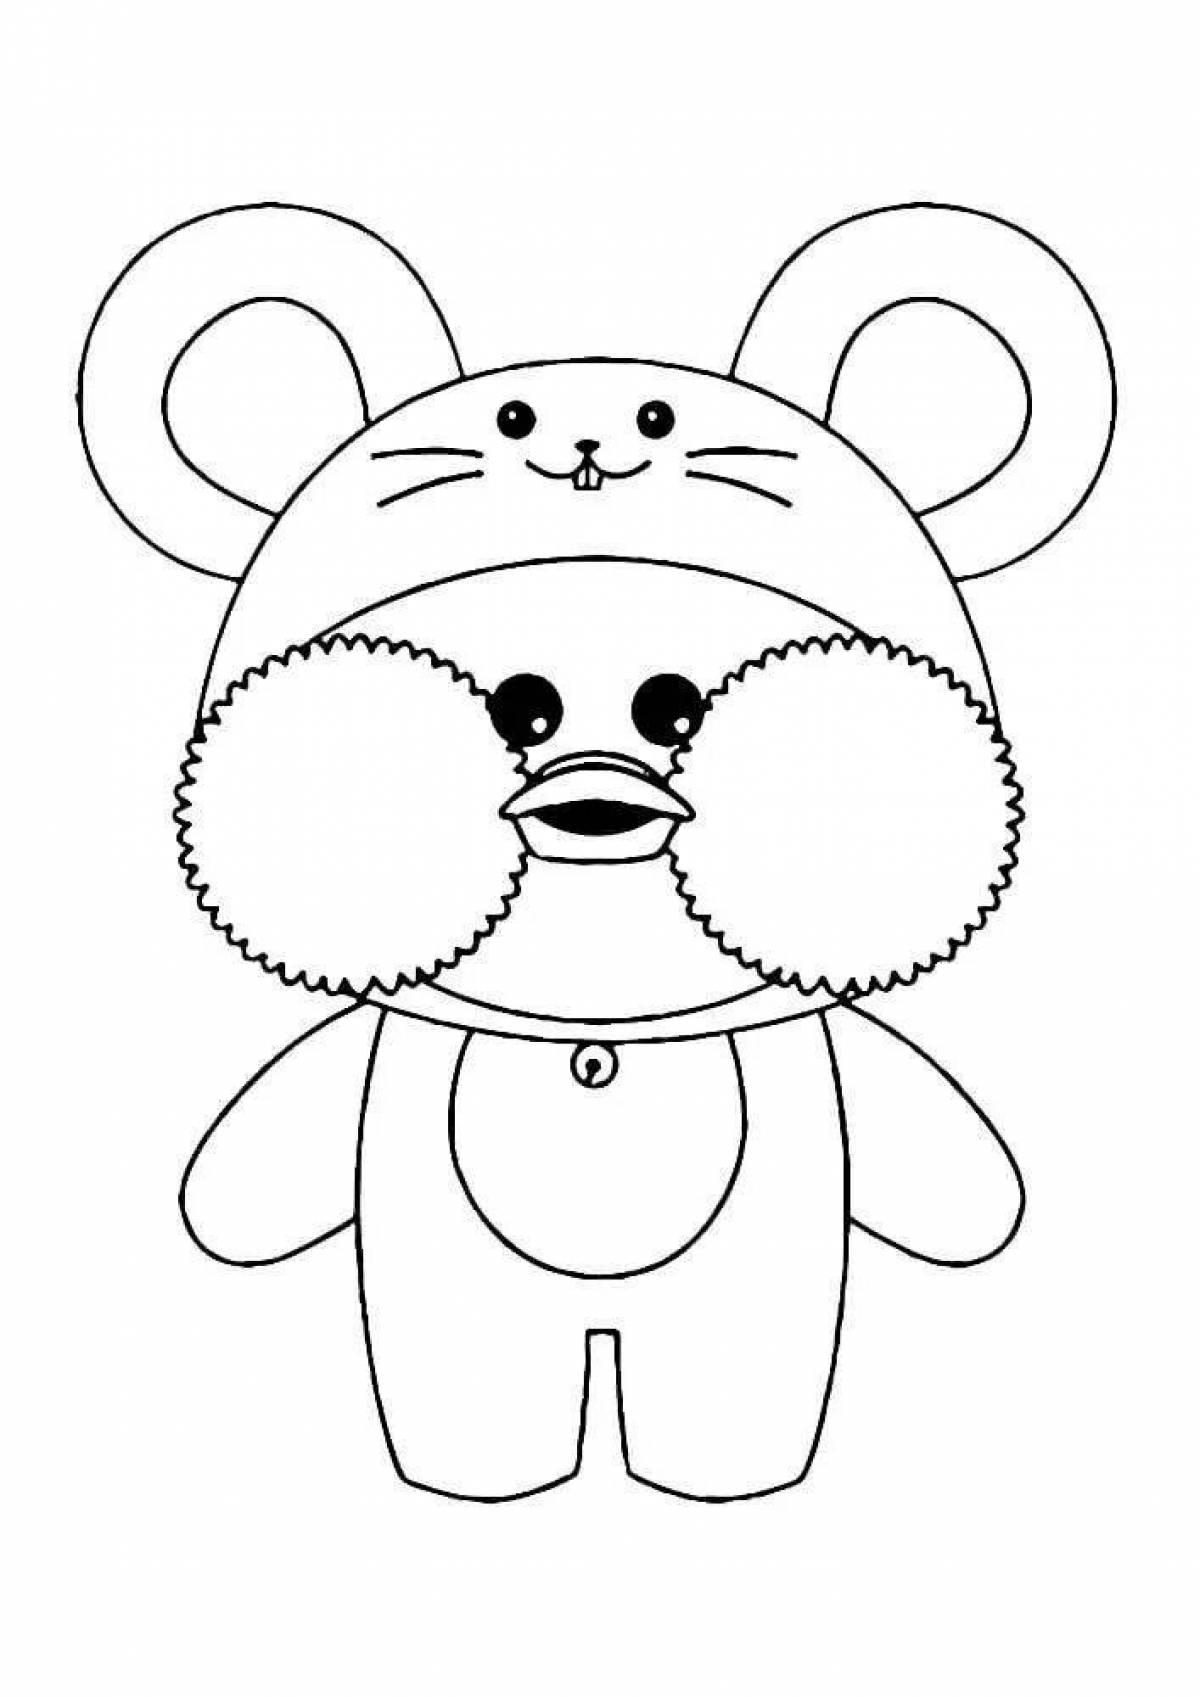 Cute duck lalyafanfan coloring pages